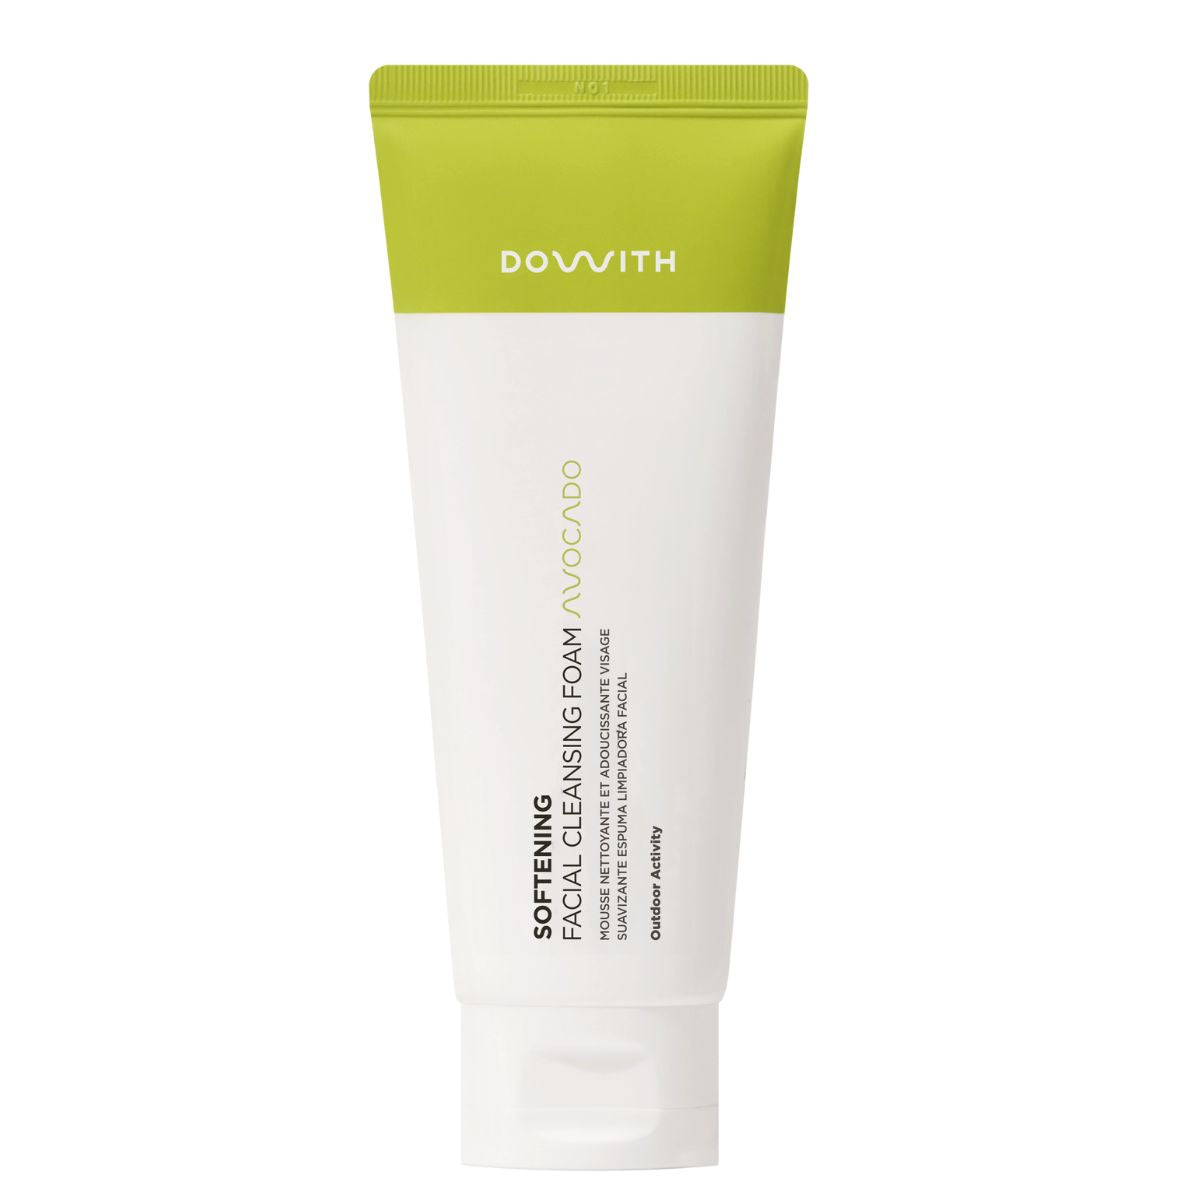 DOWITH SOFTENING FACIAL CLEANSING FOAM AVOCADO 120ml - skin